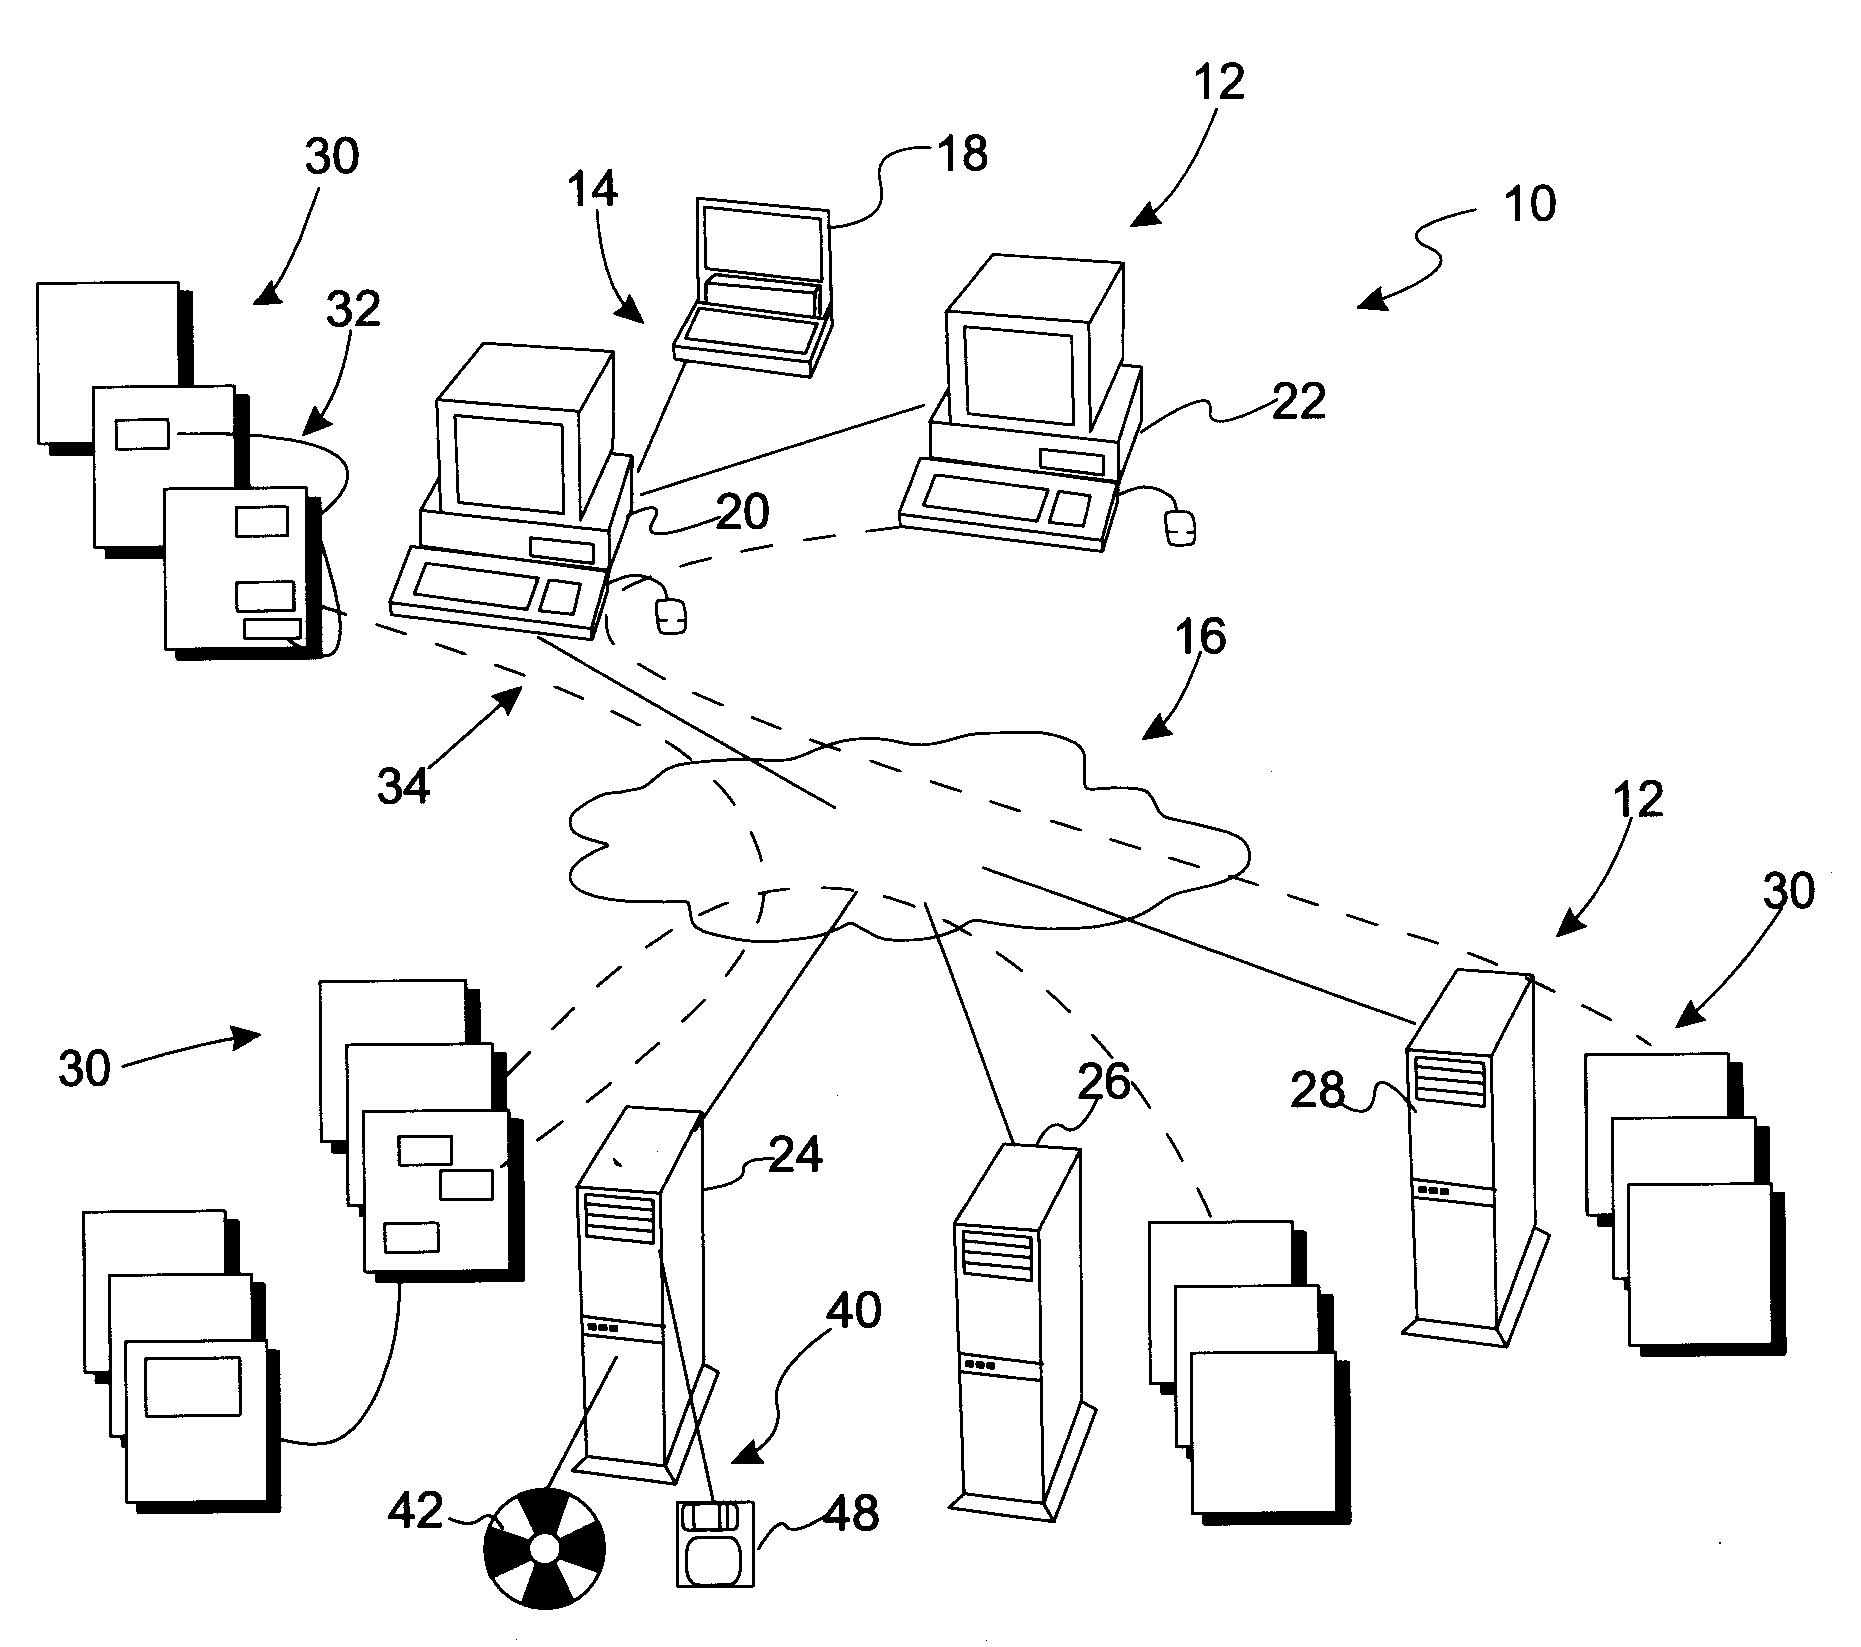 Link delivery for subsequent retrieval of networked information